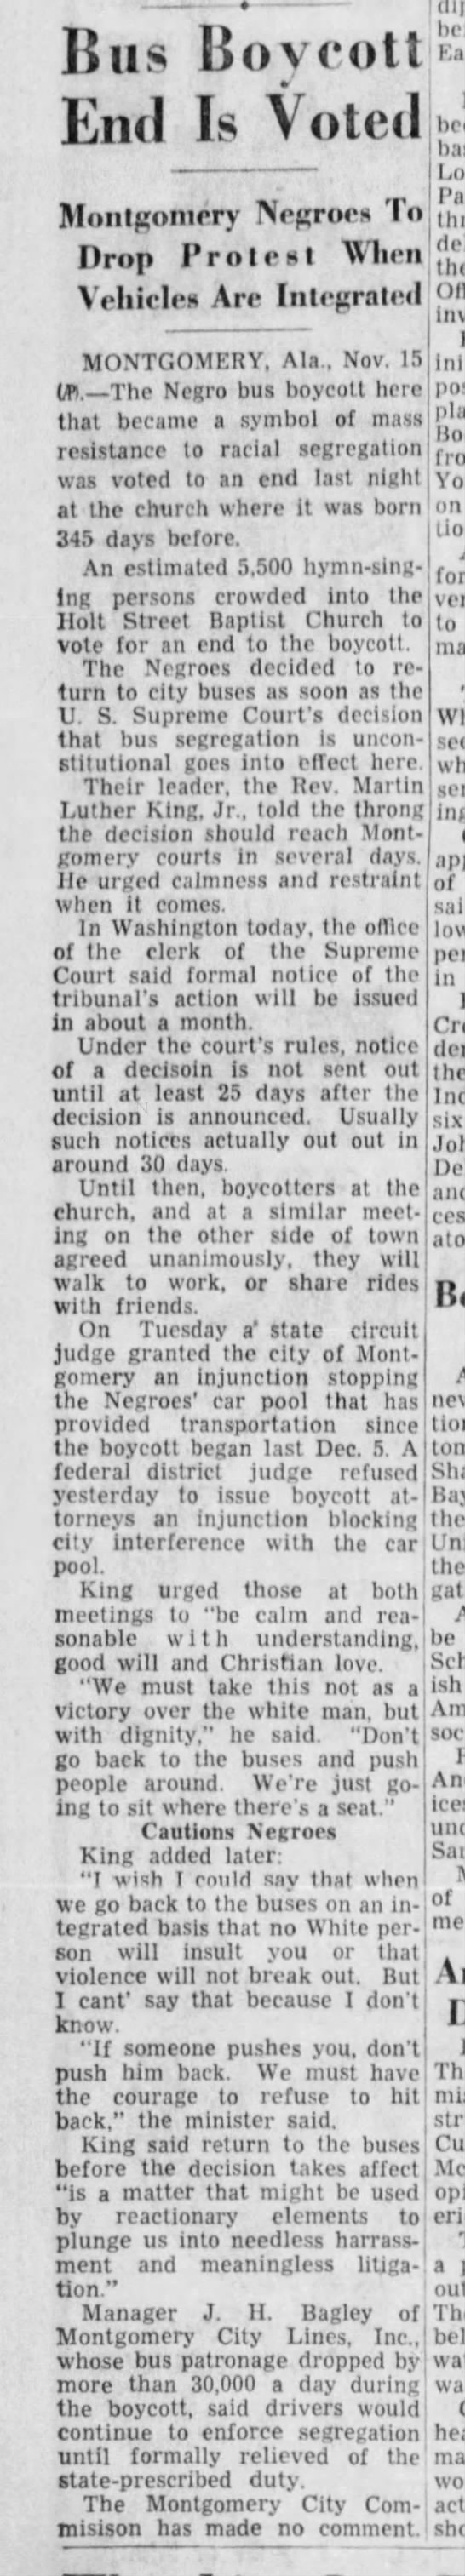 Montgomery Bus Boycott comes to an end, 1956 - 